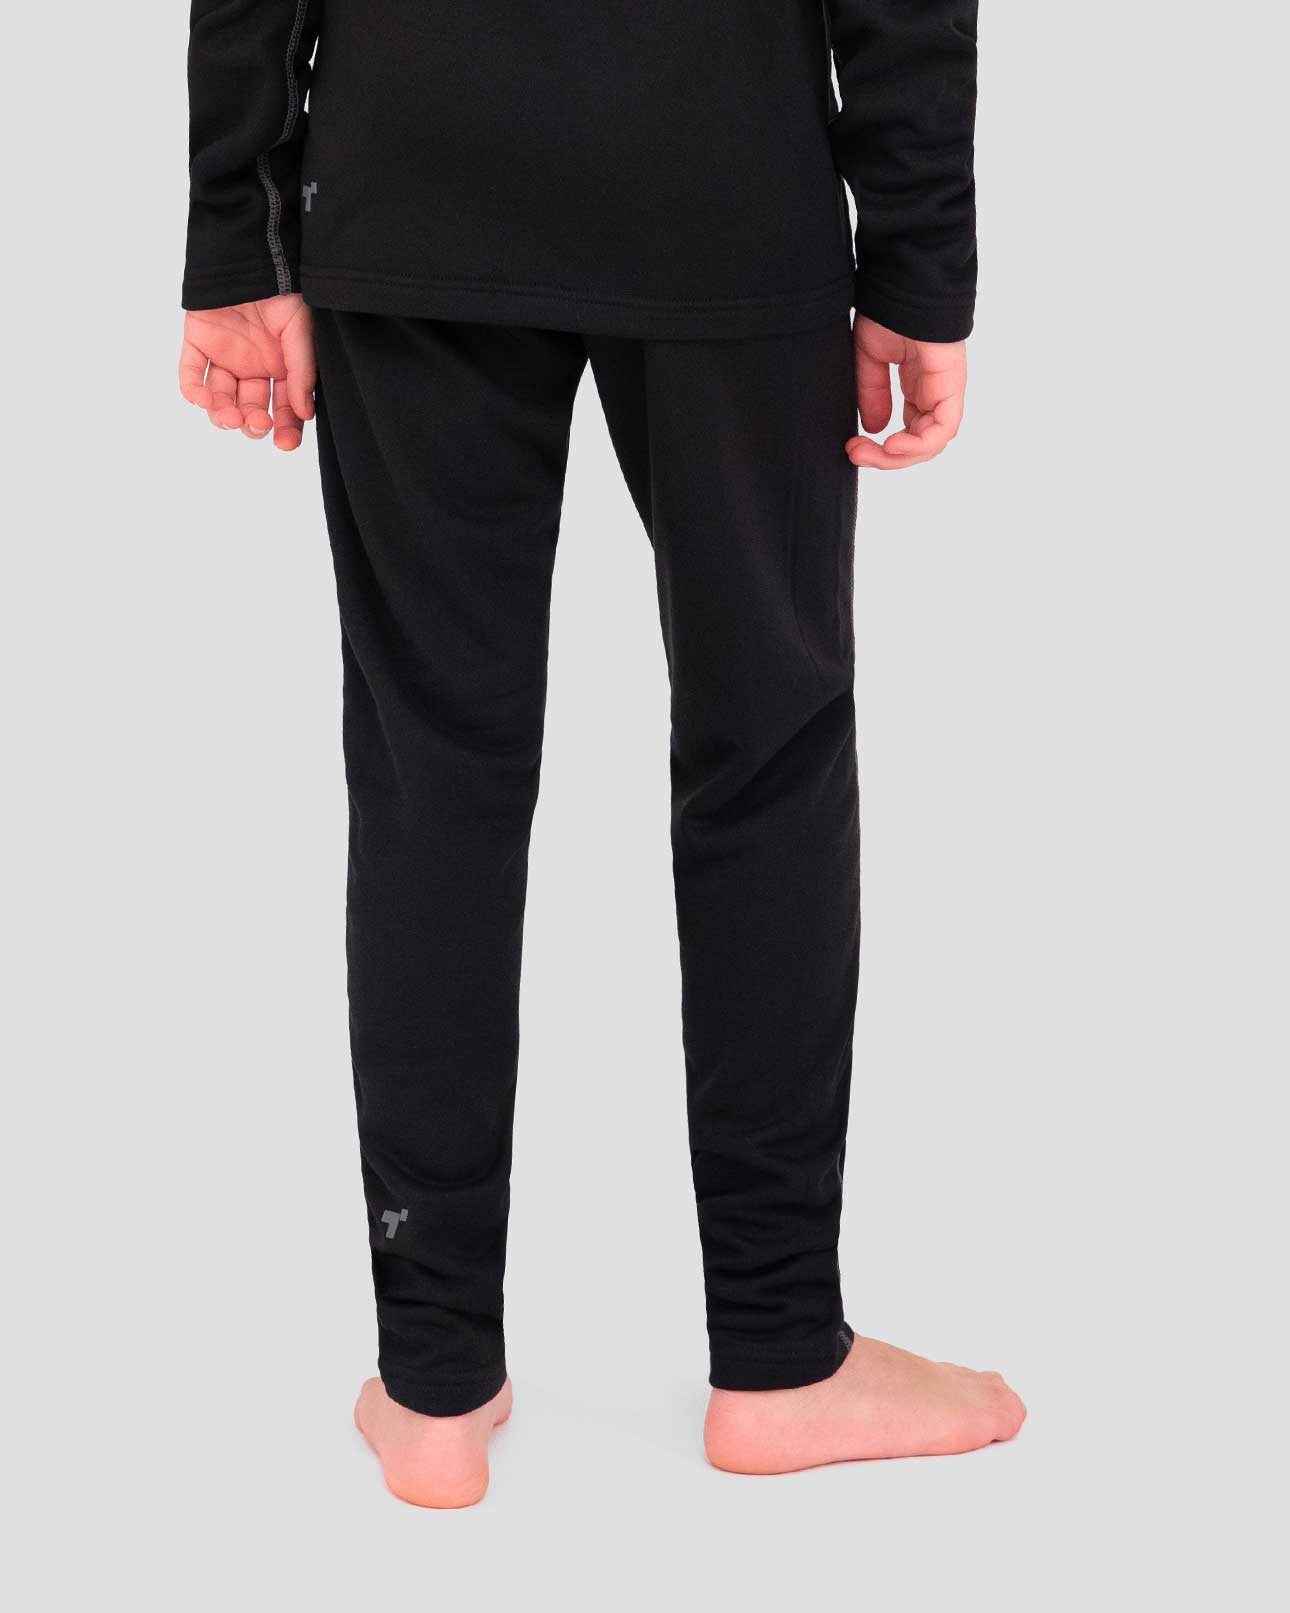 Kids' Genesis Heritage Expedition Weight Fleece Thermal Pants | Color: Onyx